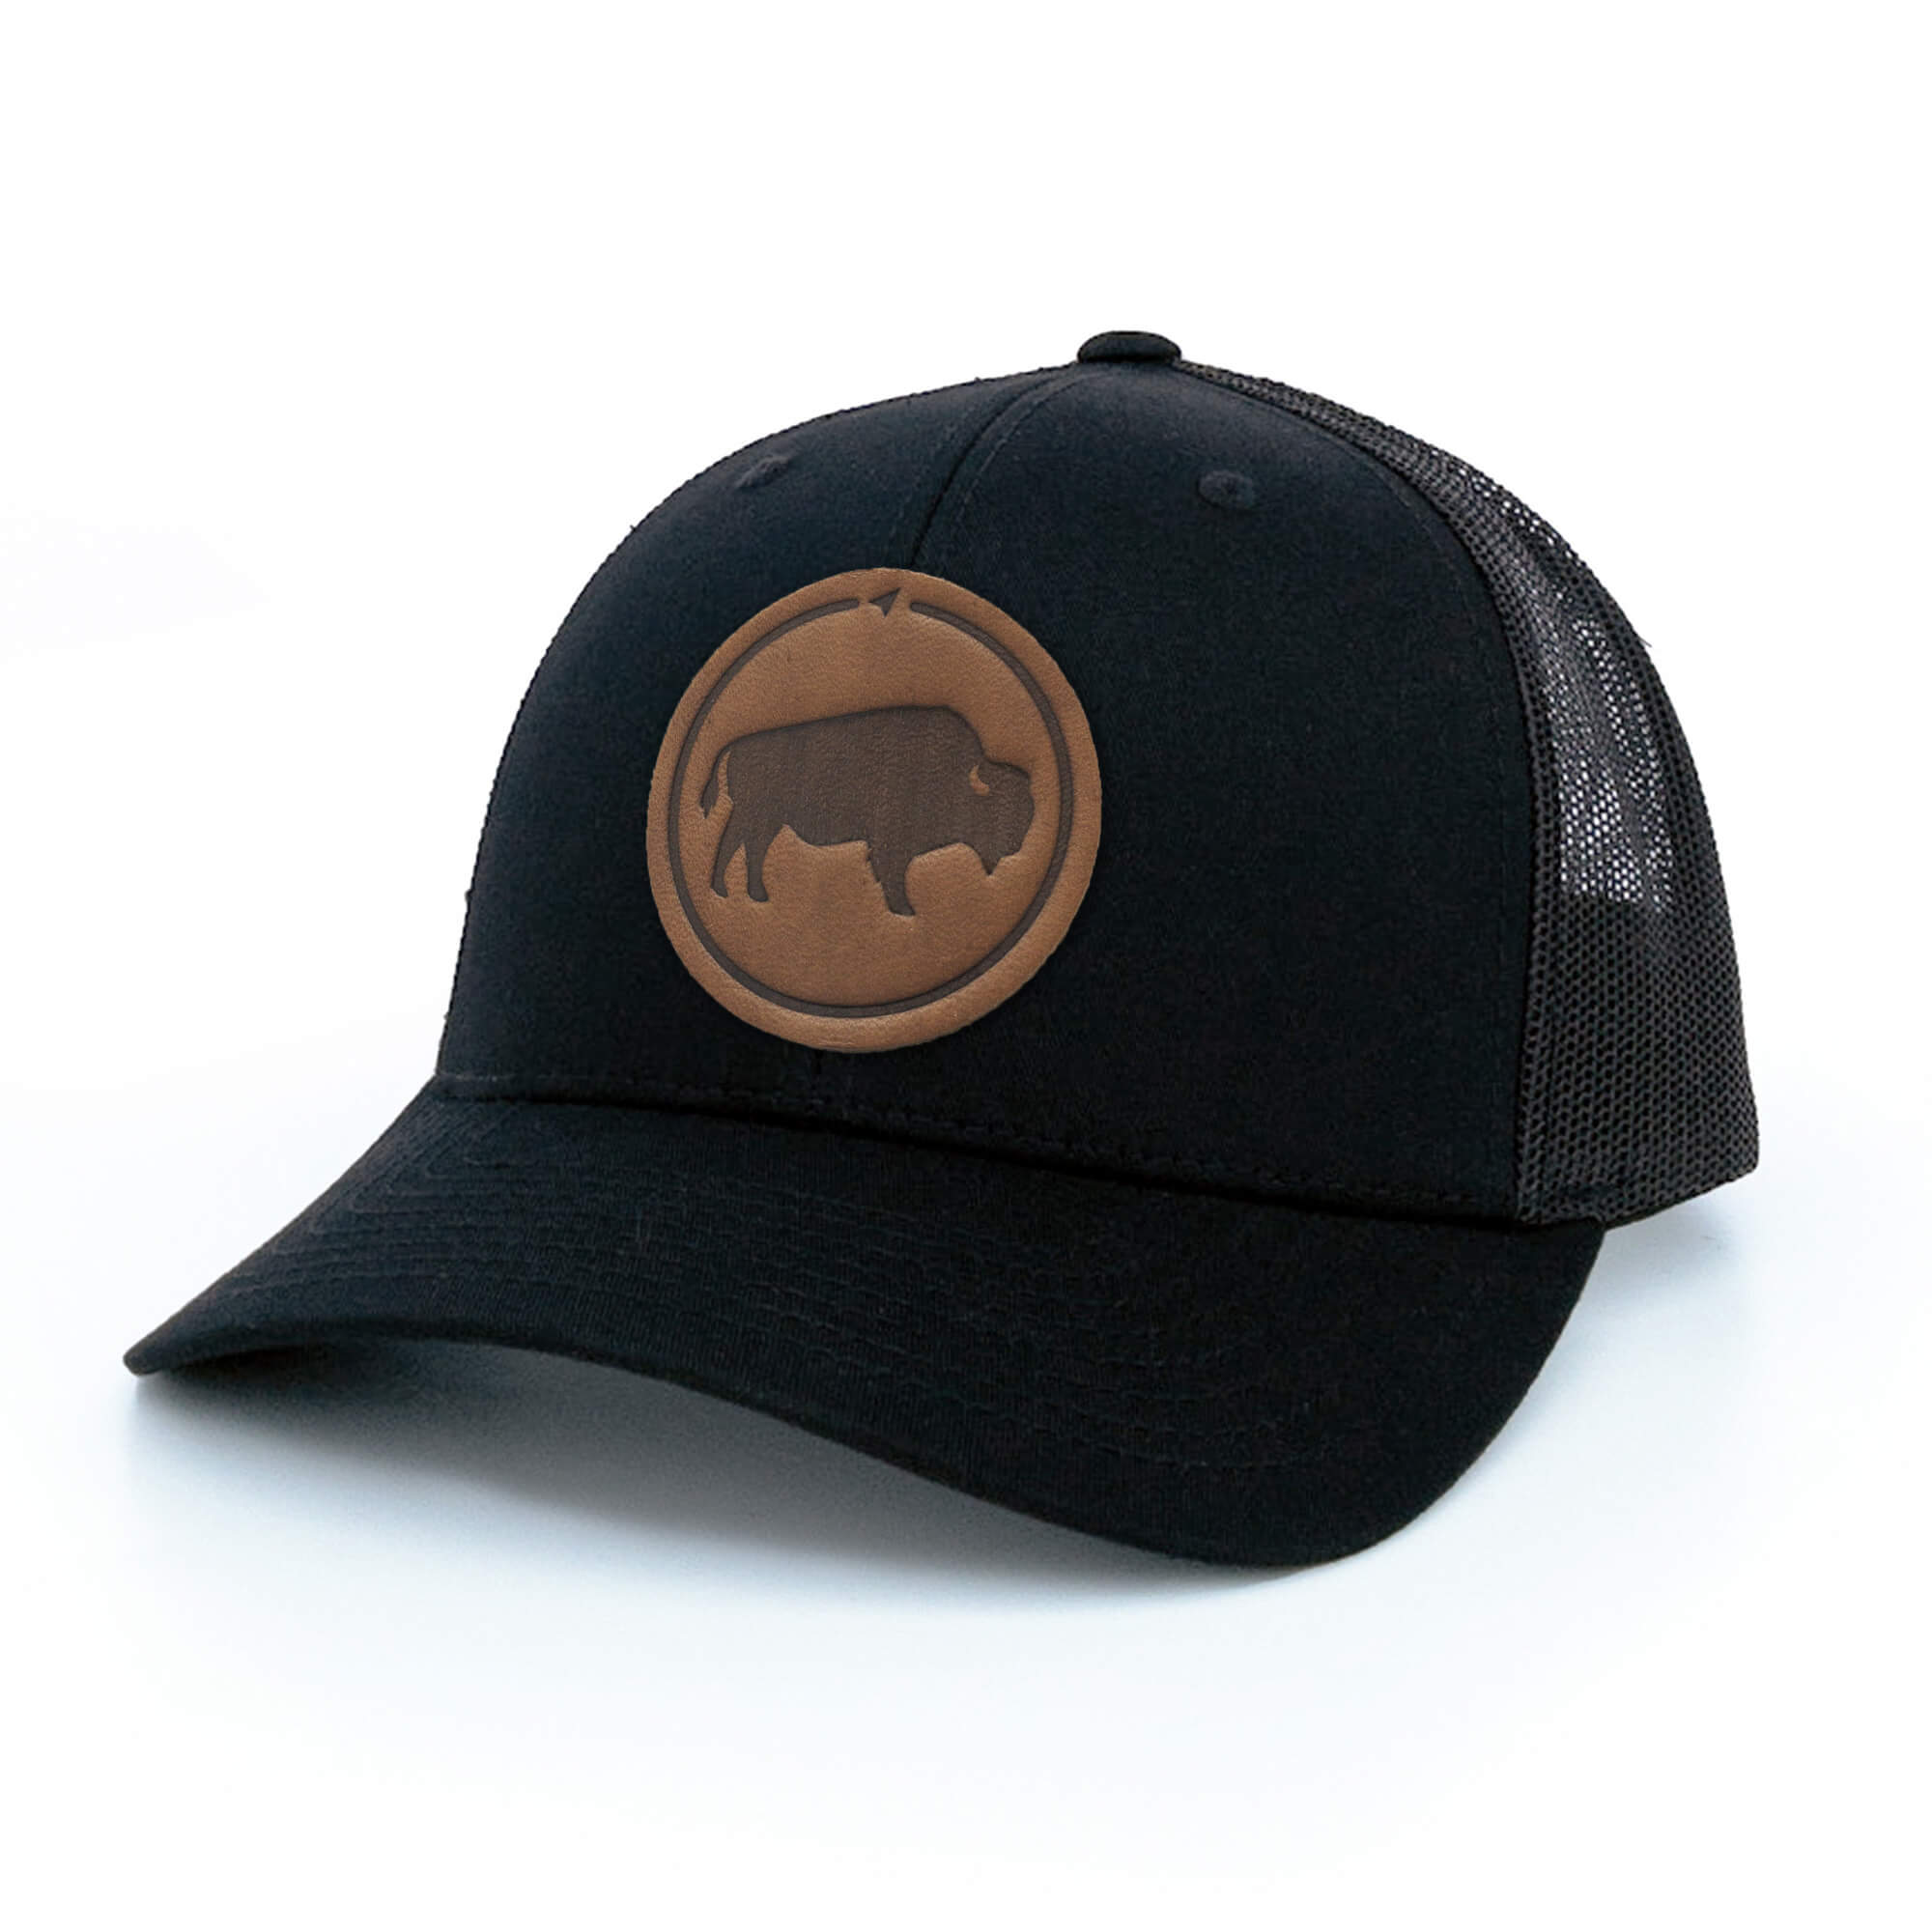 Black trucker hat with full-grain leather patch of Bison | BLACK-004-010, CHARC-004-010, NAVY-004-010, HGREY-004-010, MOSS-004-010, BROWN-004-010